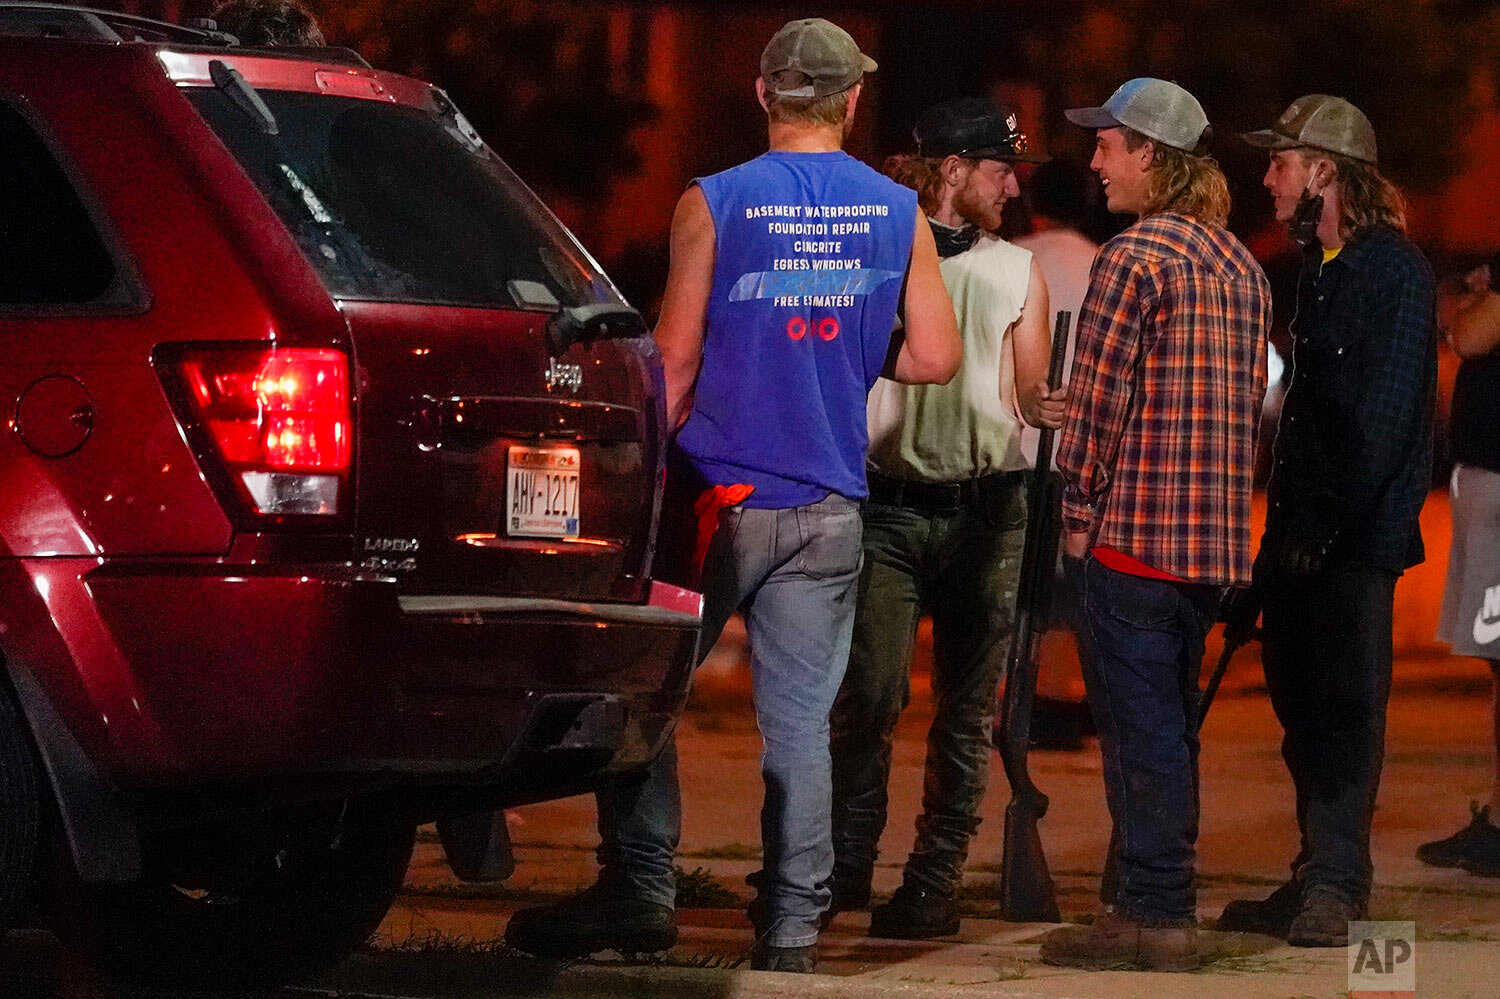  A group holds rifles as they watch protesters on the street Tuesday, Aug. 25, 2020, in Kenosha, Wis. (AP Photo/Morry Gash) 